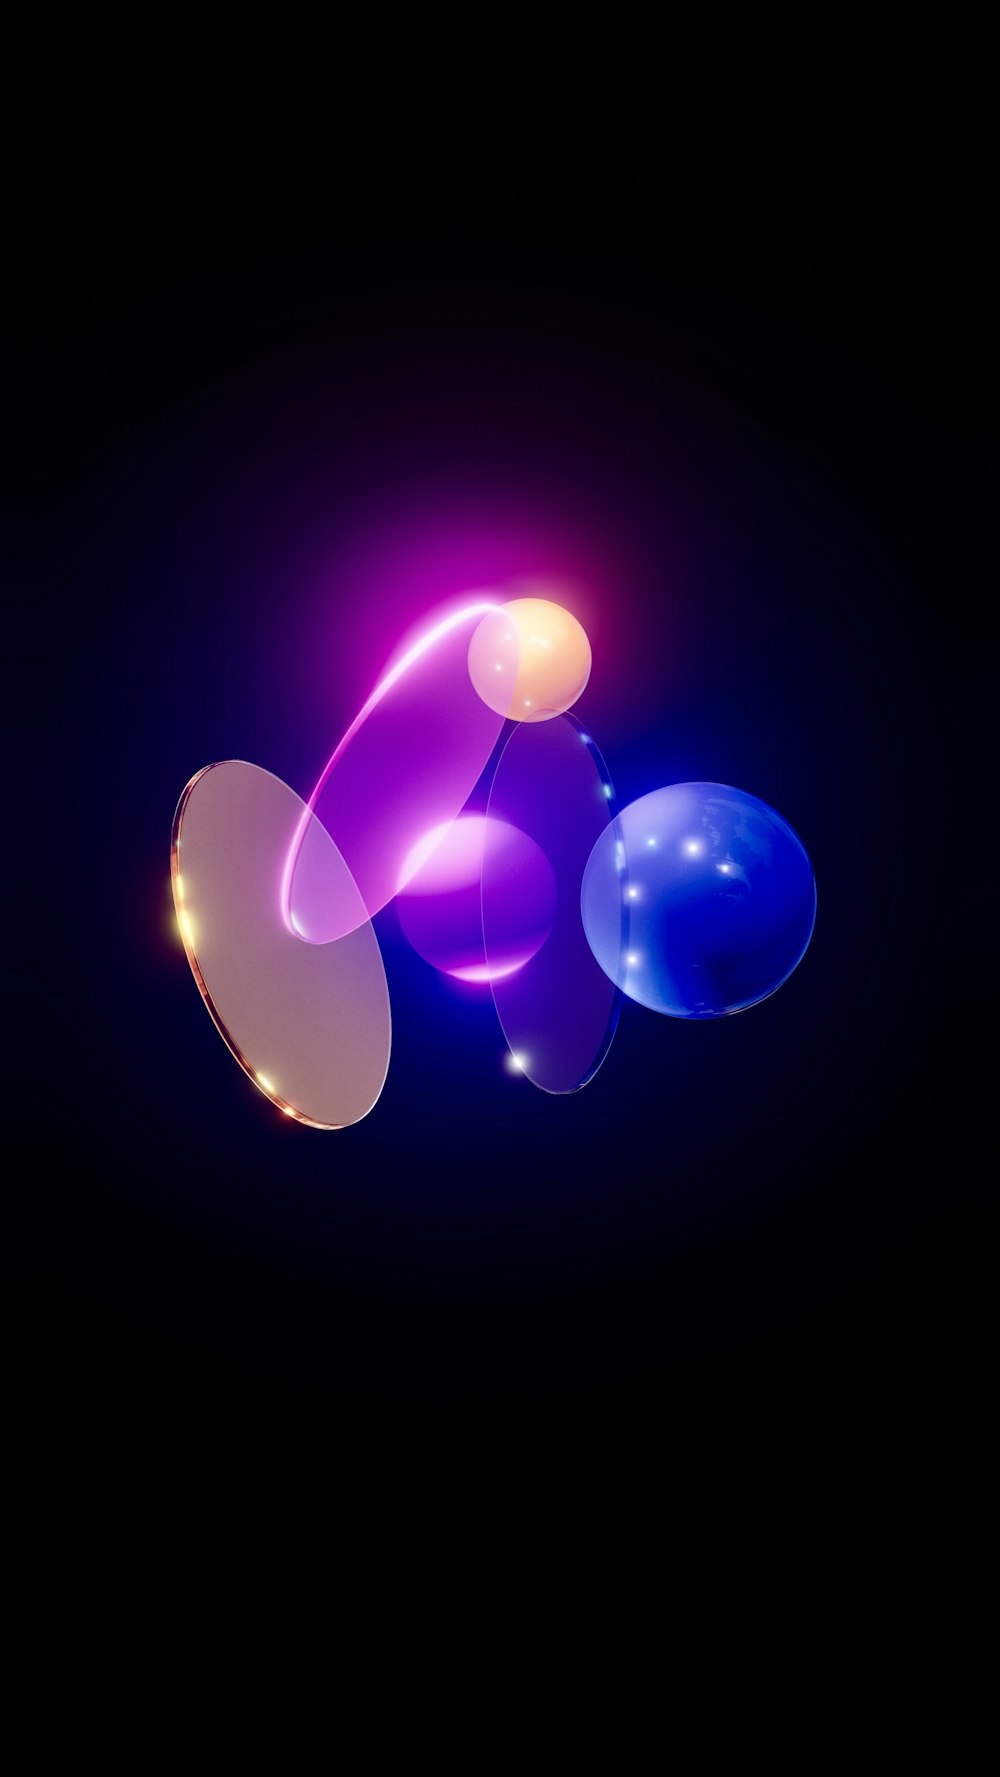 a black background with a purple and blue design